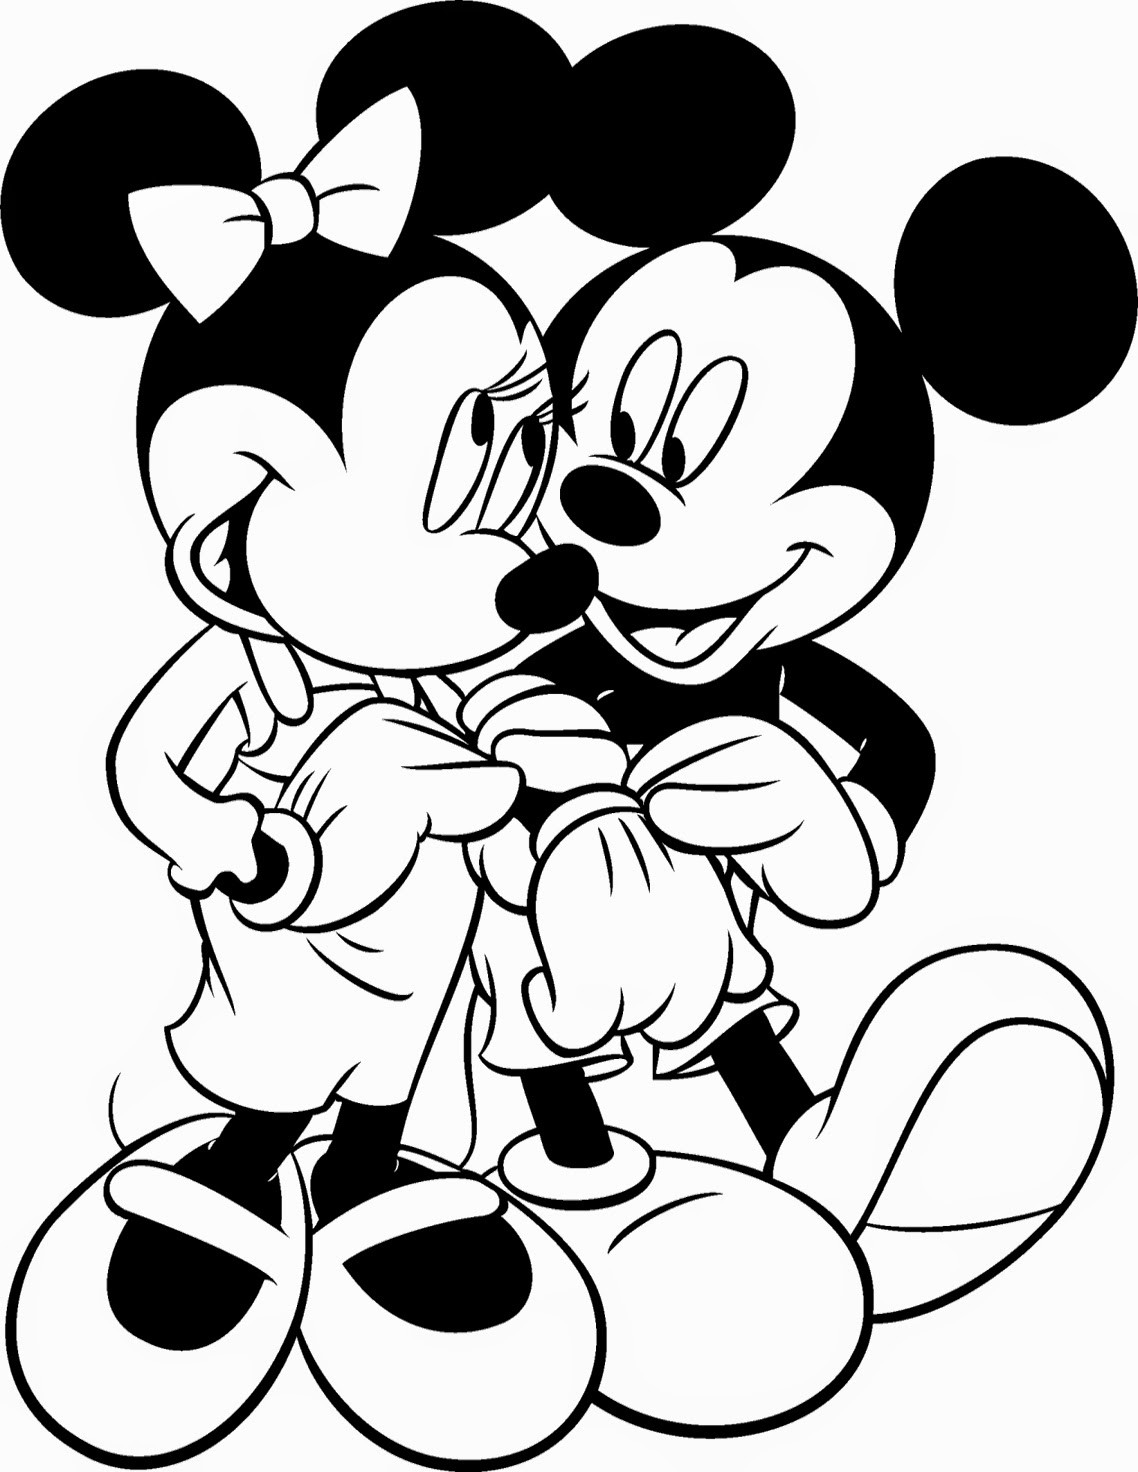 Mickey And Minnie Mouse Coloring Pages
 Coloring Pages Minnie Mouse Coloring Pages Free and Printable